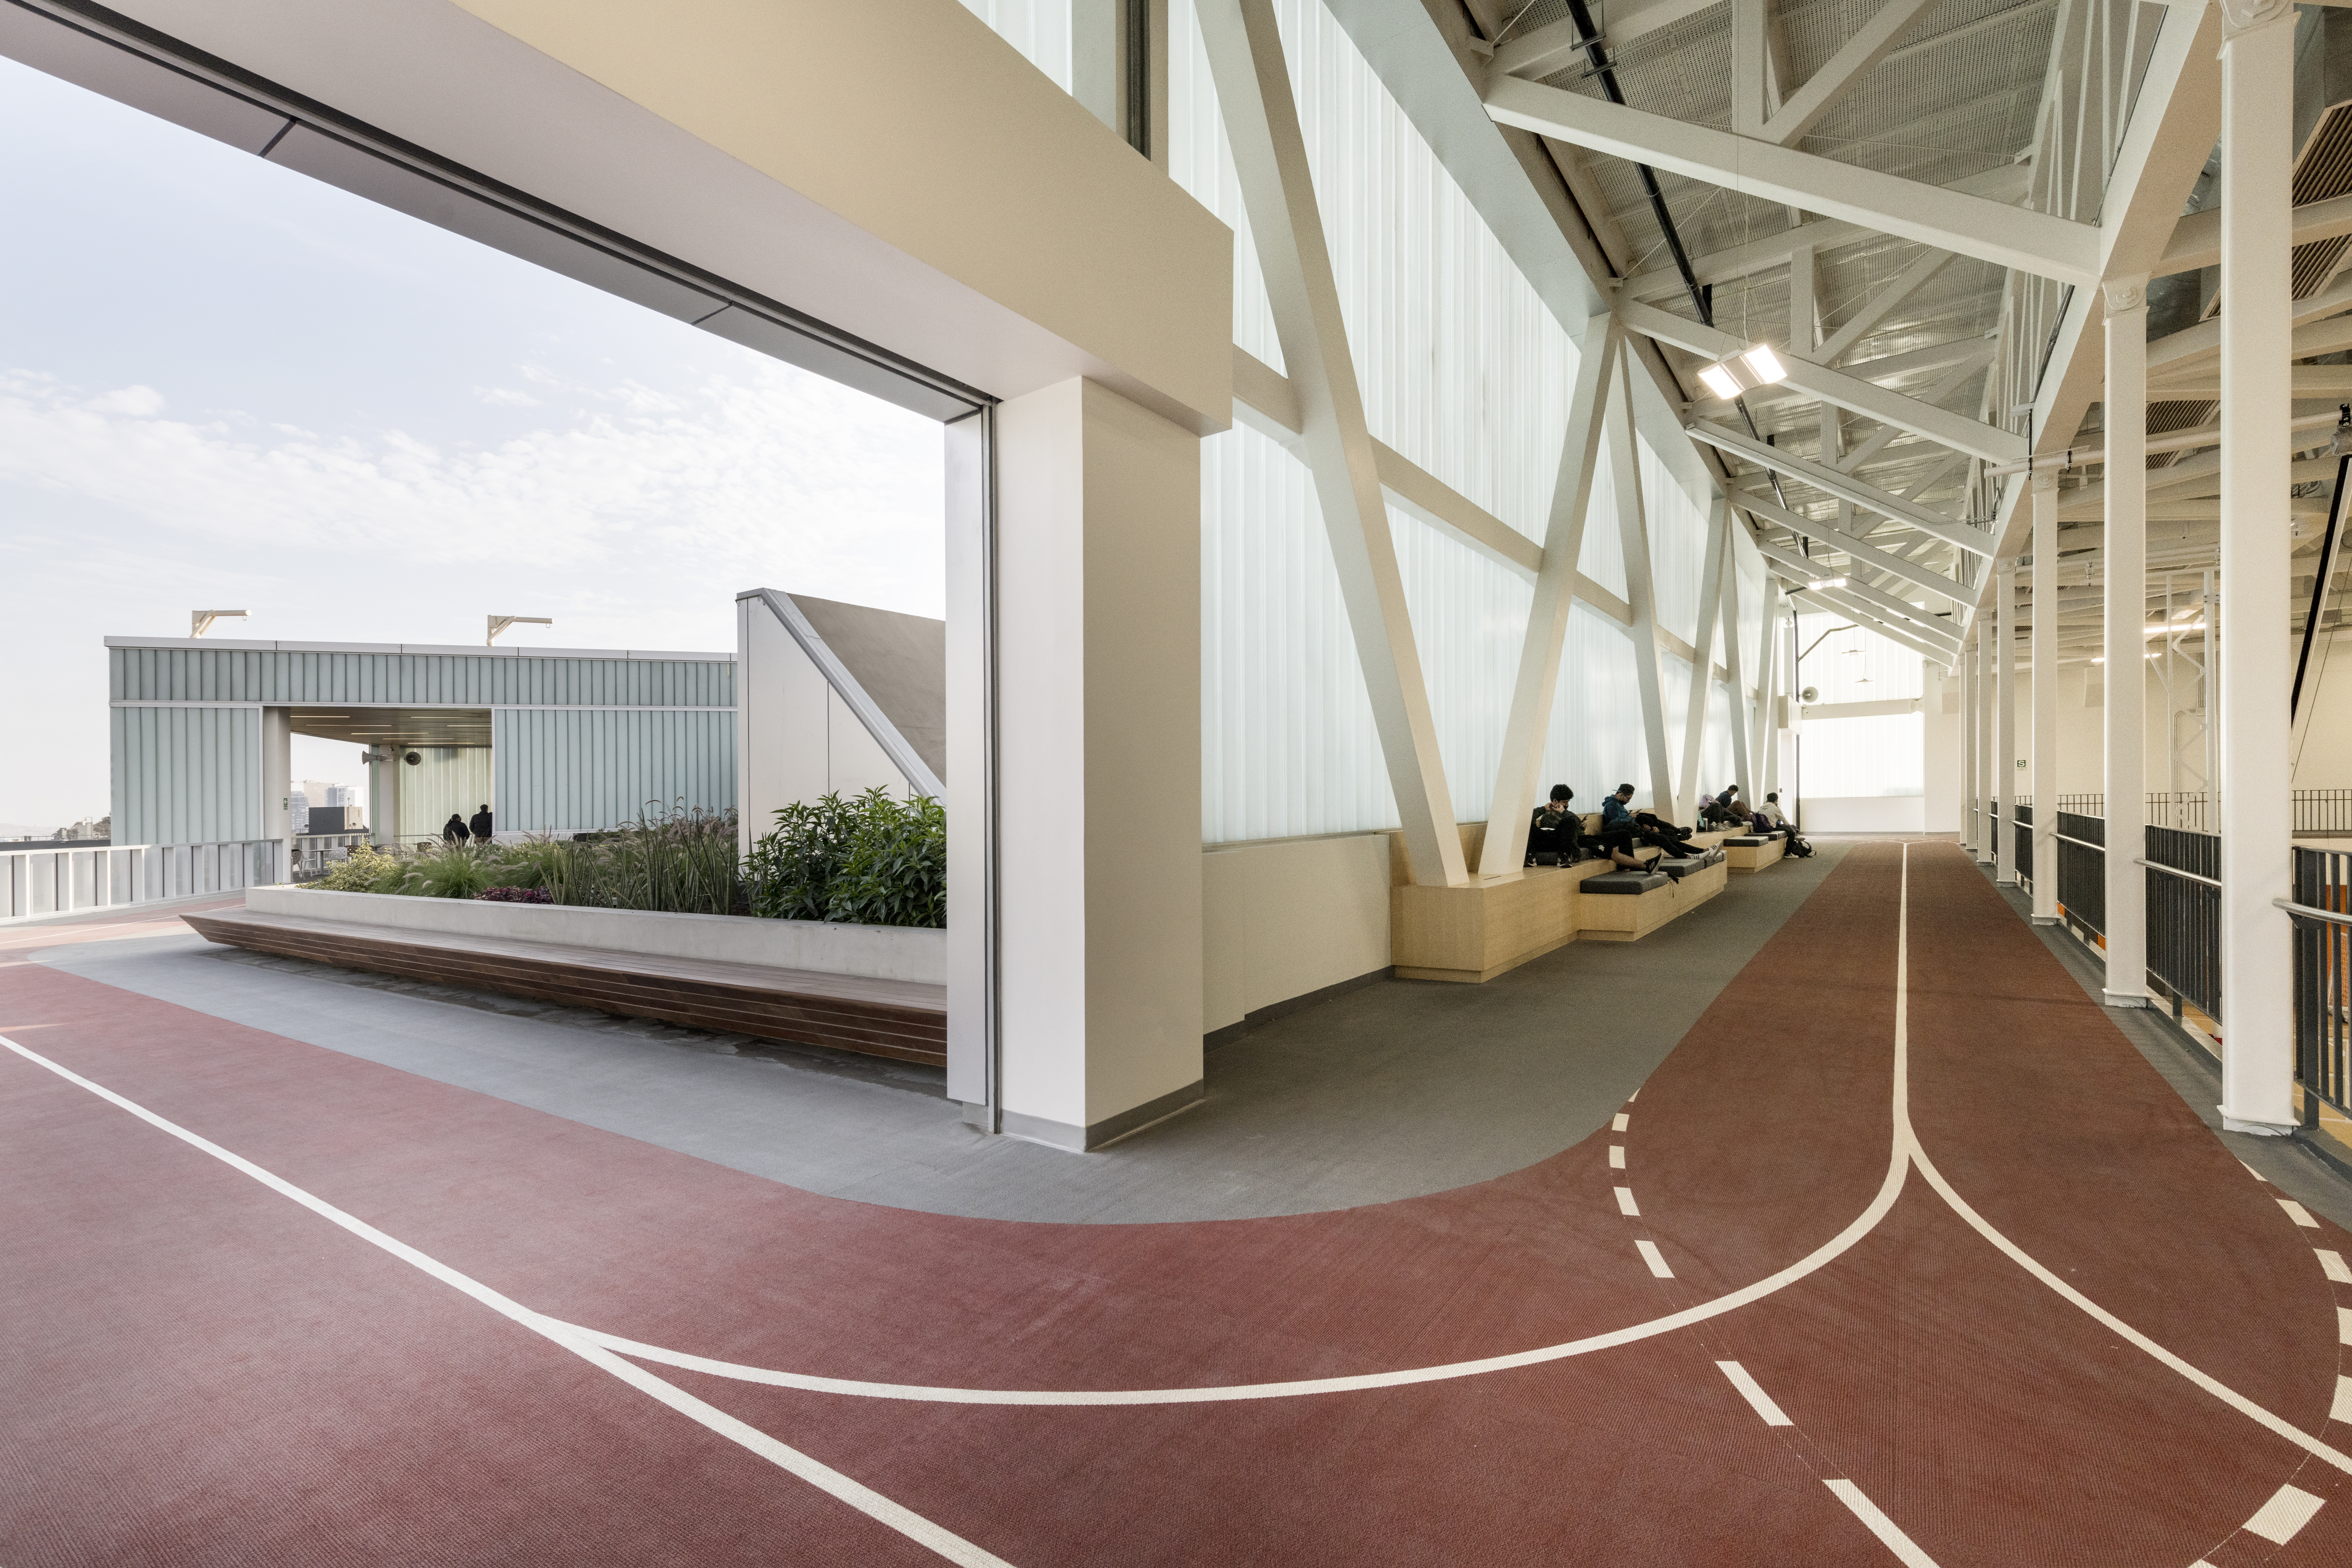 Color photo. On the building roof, a track weaves between covered spaces and the open sky. Students walk the track and study on adjacent benches.